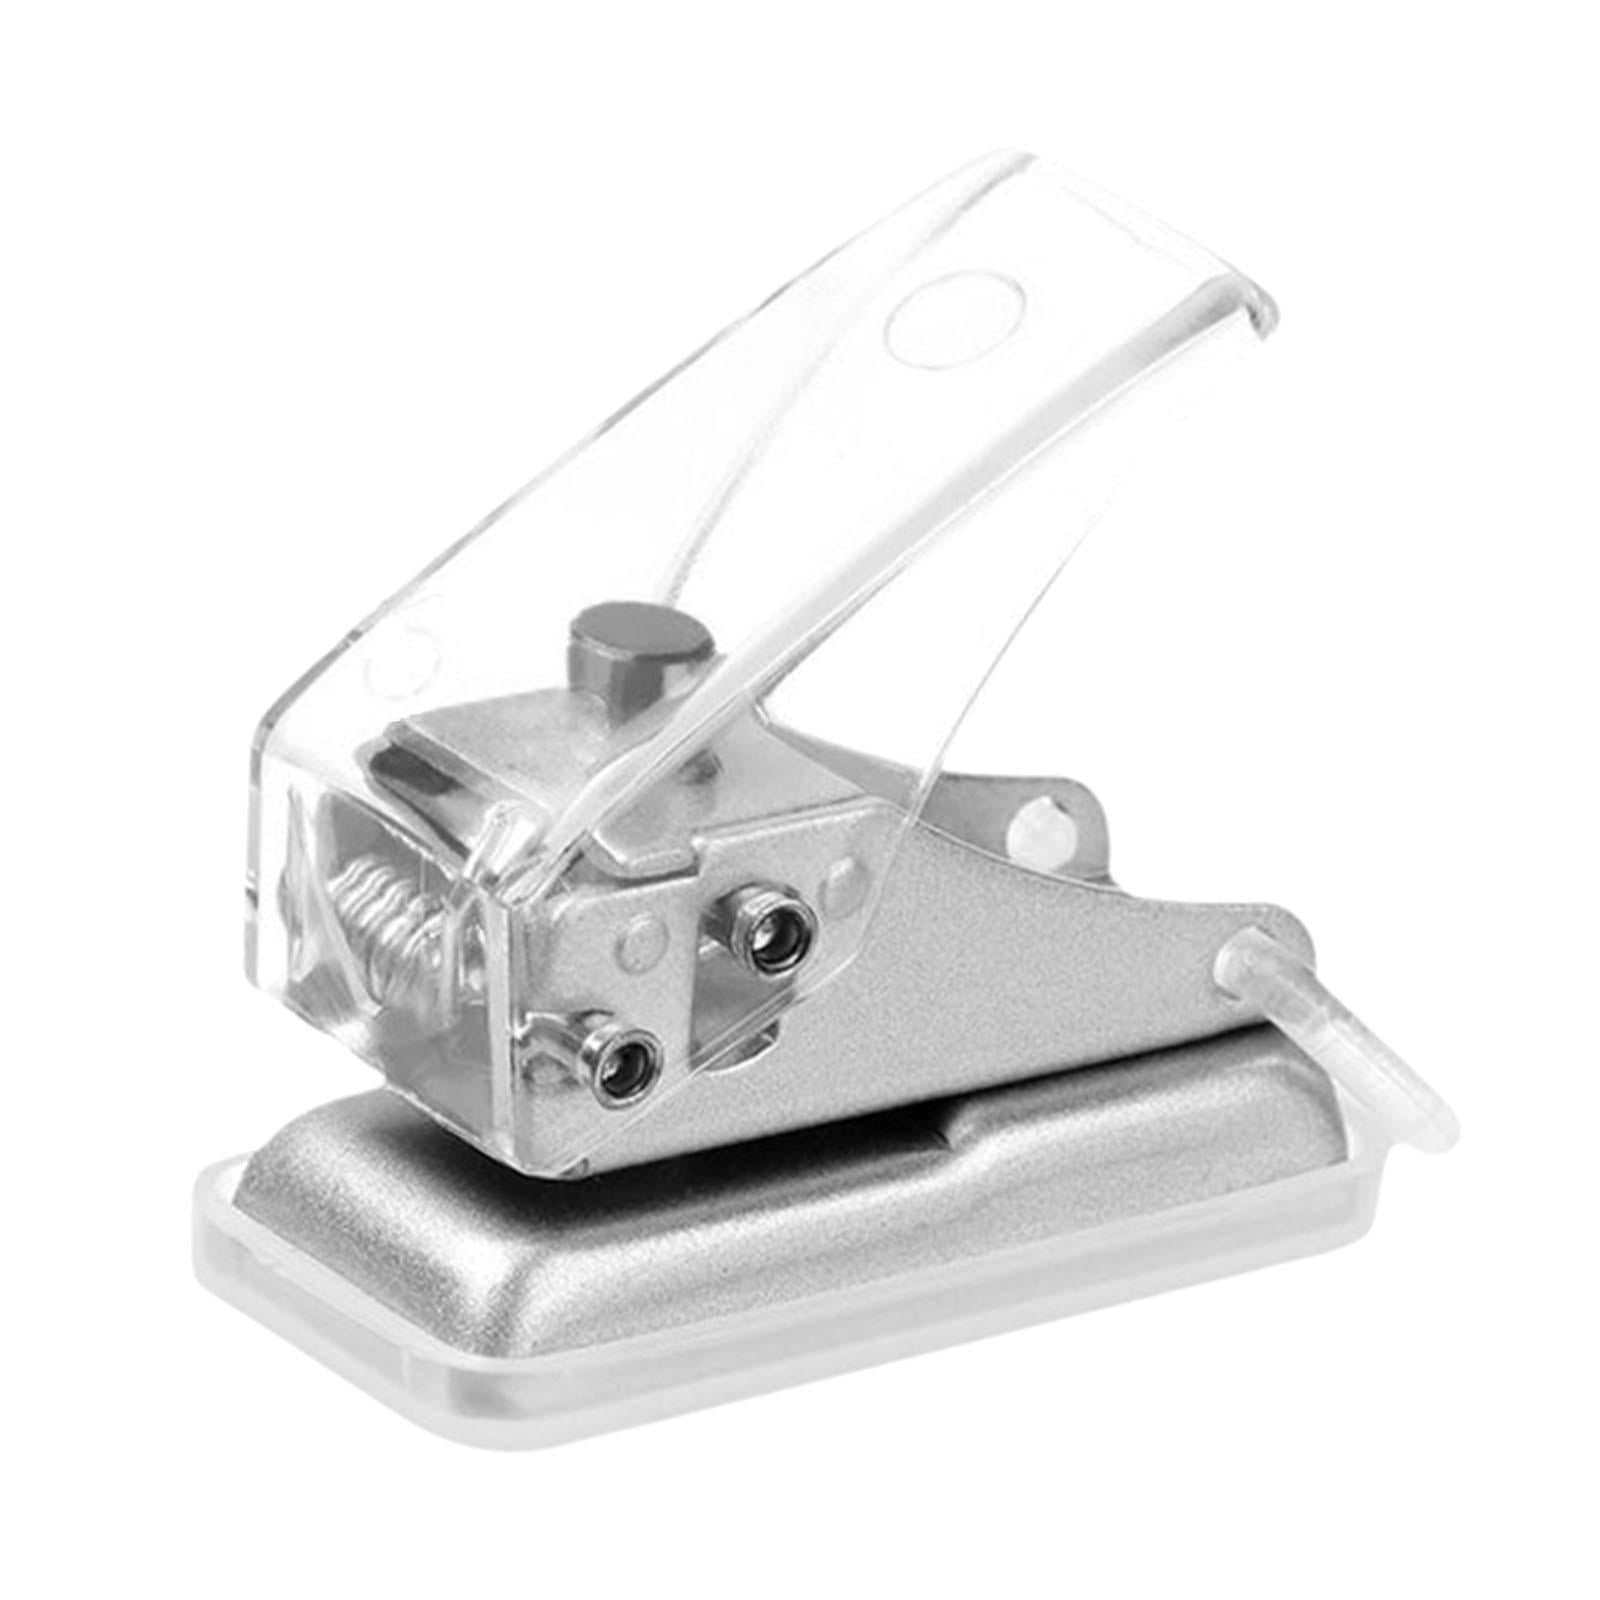 Handheld Mini Single Hole Puncher Punch for DIY Project Hole 1/4 inch  Functional Labor Saving Removable Waste Compartment Durable Tool ,  Transparent 